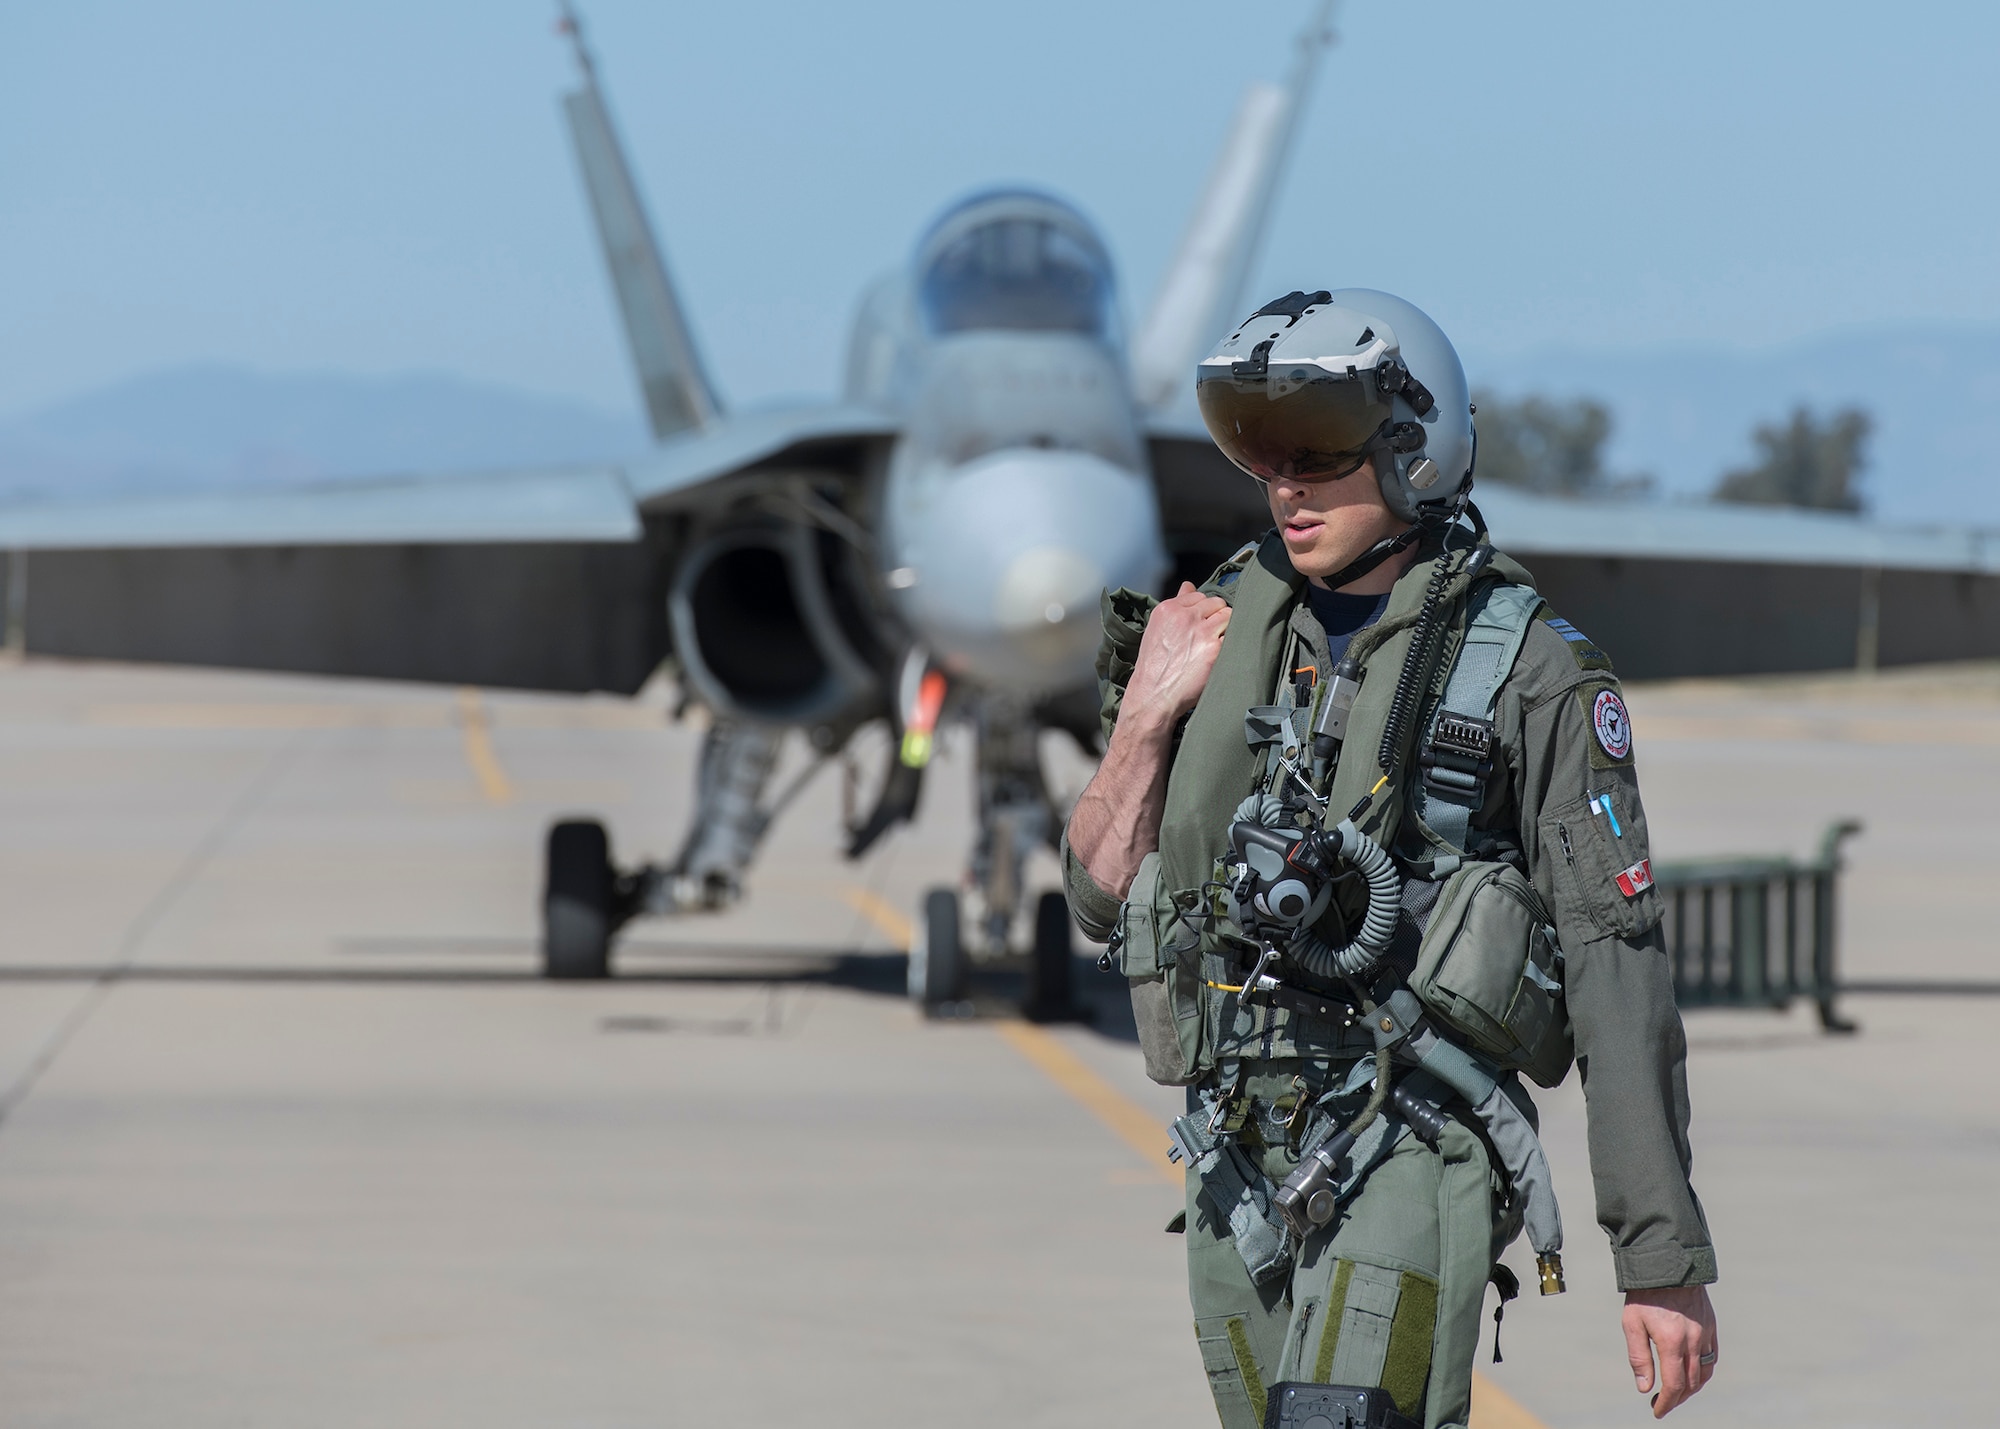 A Royal Canadian air force CF-18 Hornet pilot, assigned to the 433rd Tactical Fighter Squadron in Canadian Forces Base Bagotville, Quebec, Canada, prepares for a flight Feb. 25, 2020, at Luke Air Force Base, Ariz.